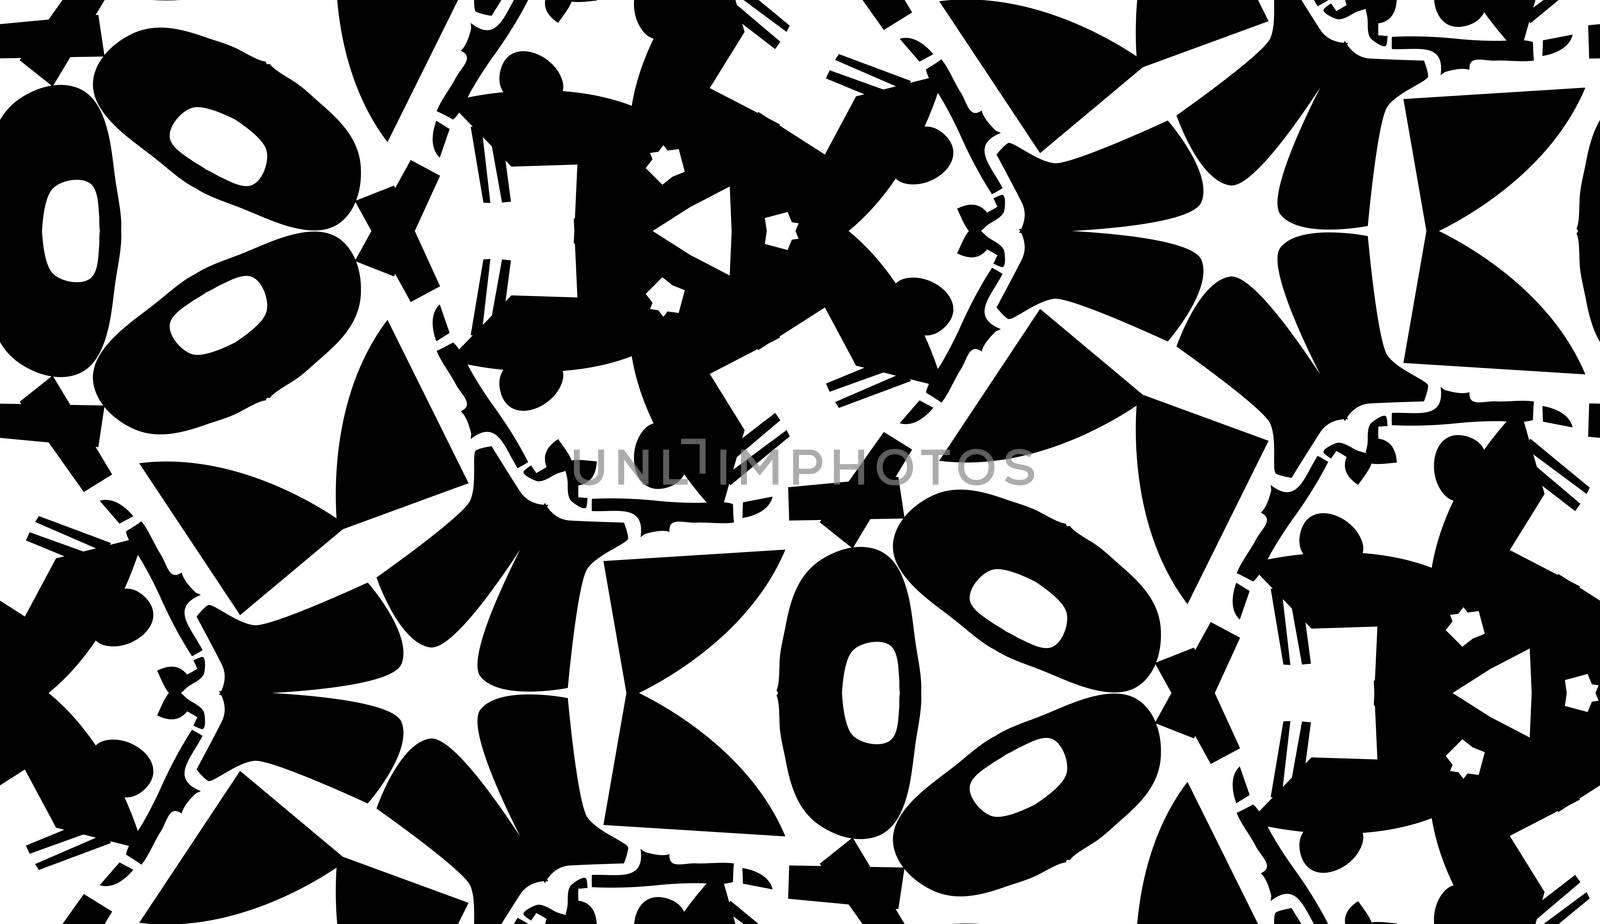 Seamless black abstract shapes in repeating background pattern